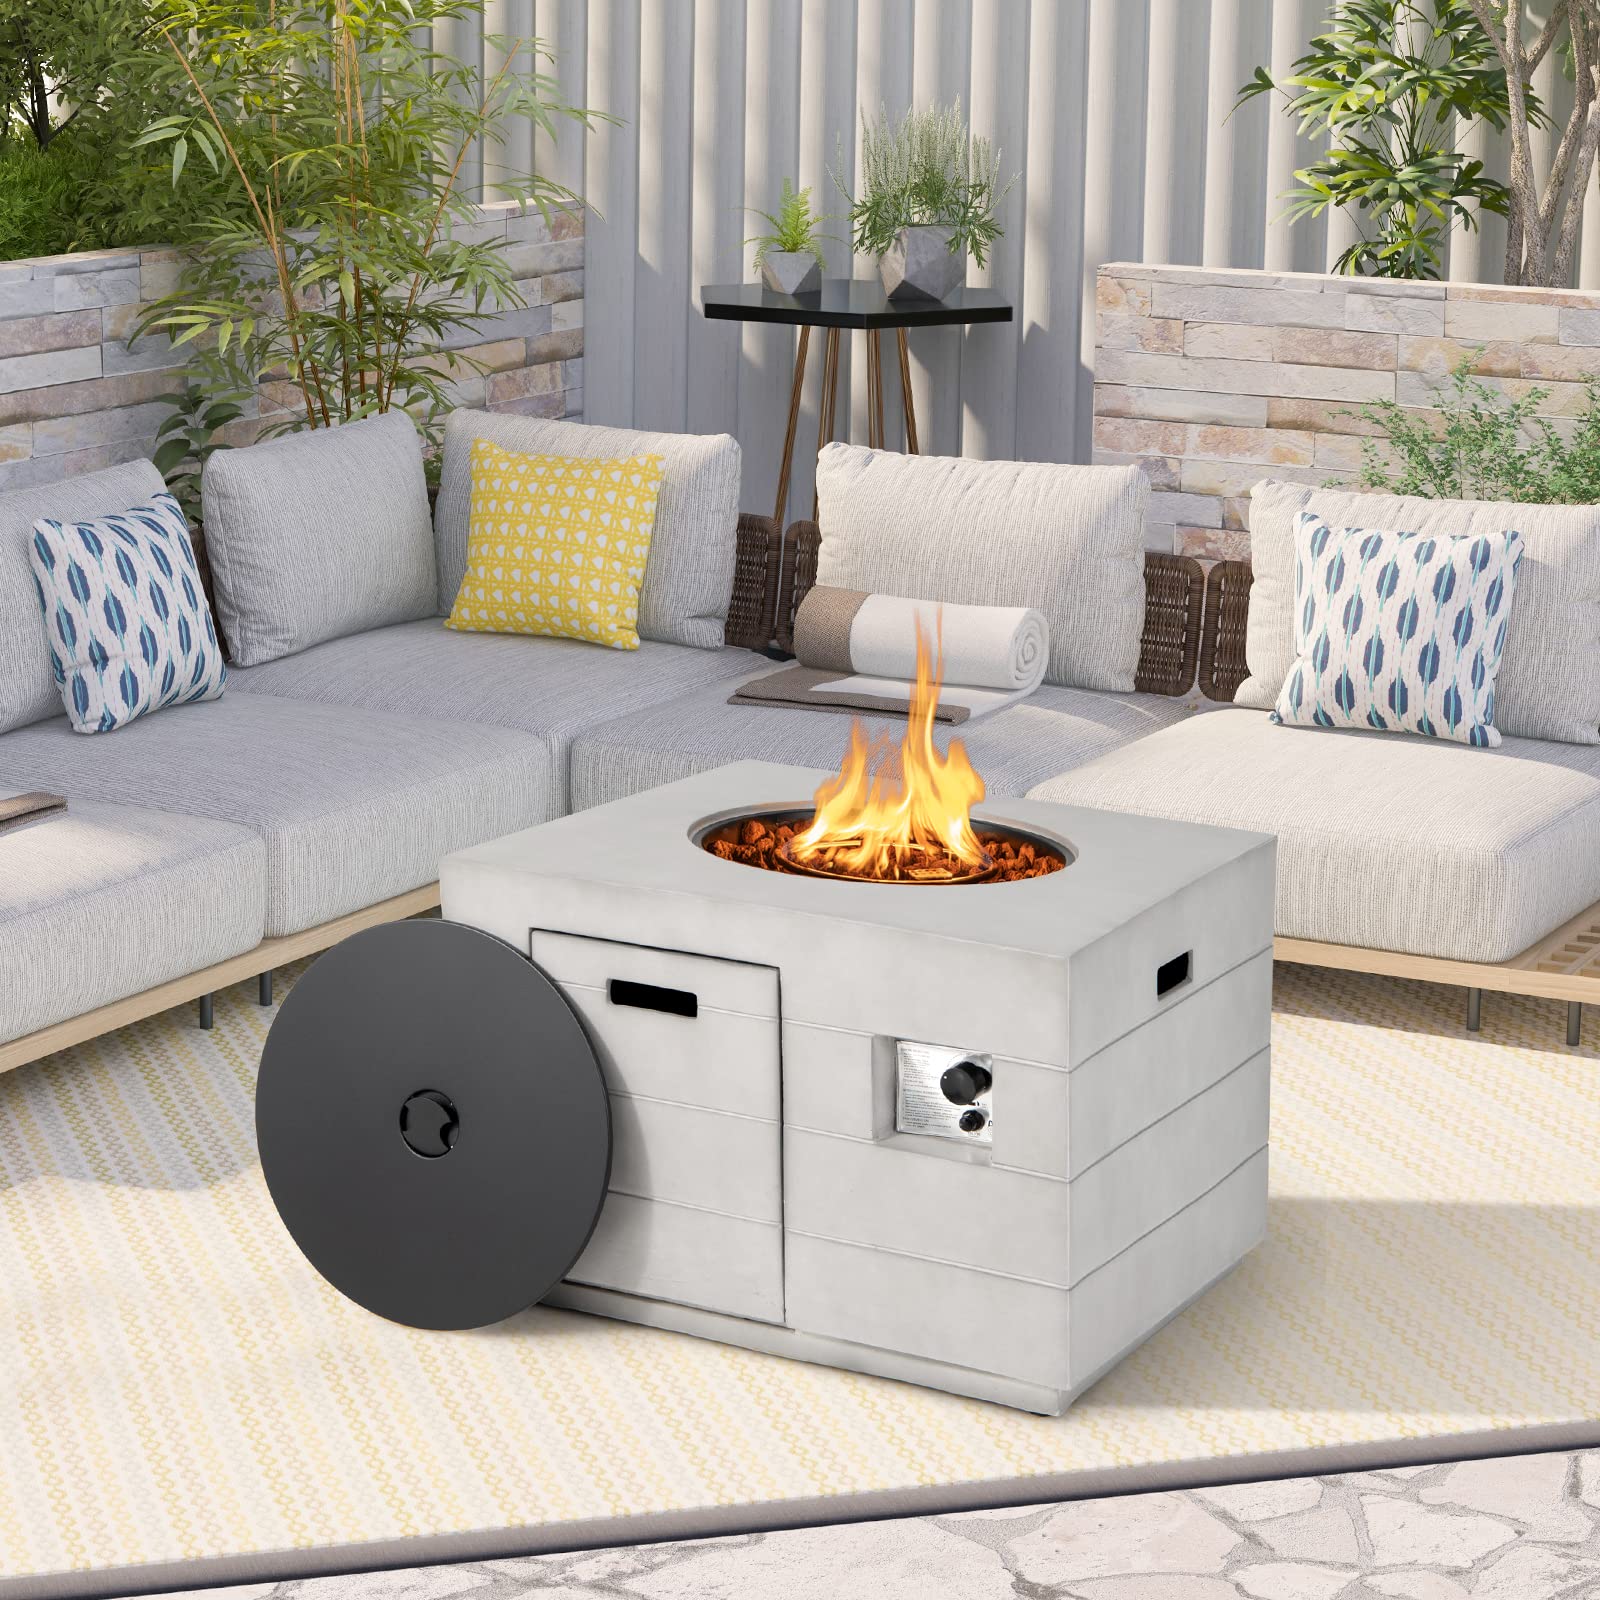 Tangkula 35 Inch Concrete Propane Gas Fire Pit Table, Patiojoy Square Outdoor Propane Fire Table with Protective Cover Lava Rocks & Metal Lid